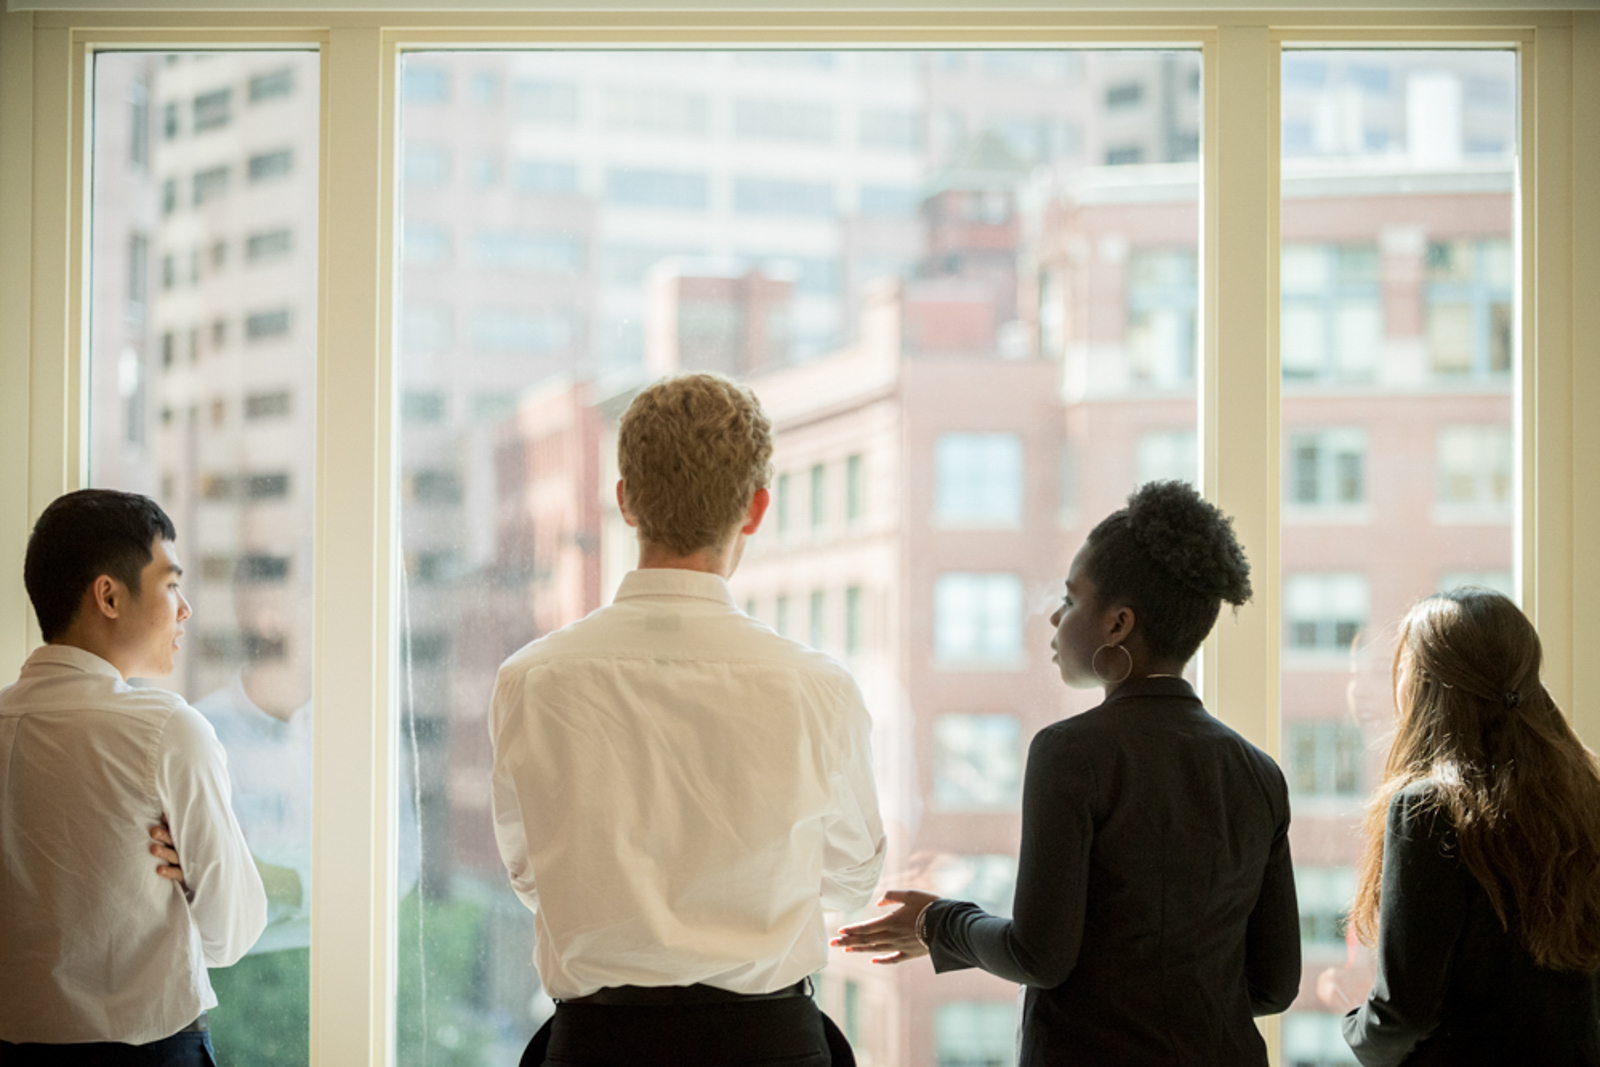 Image of four young people in a business setting looking outside a window